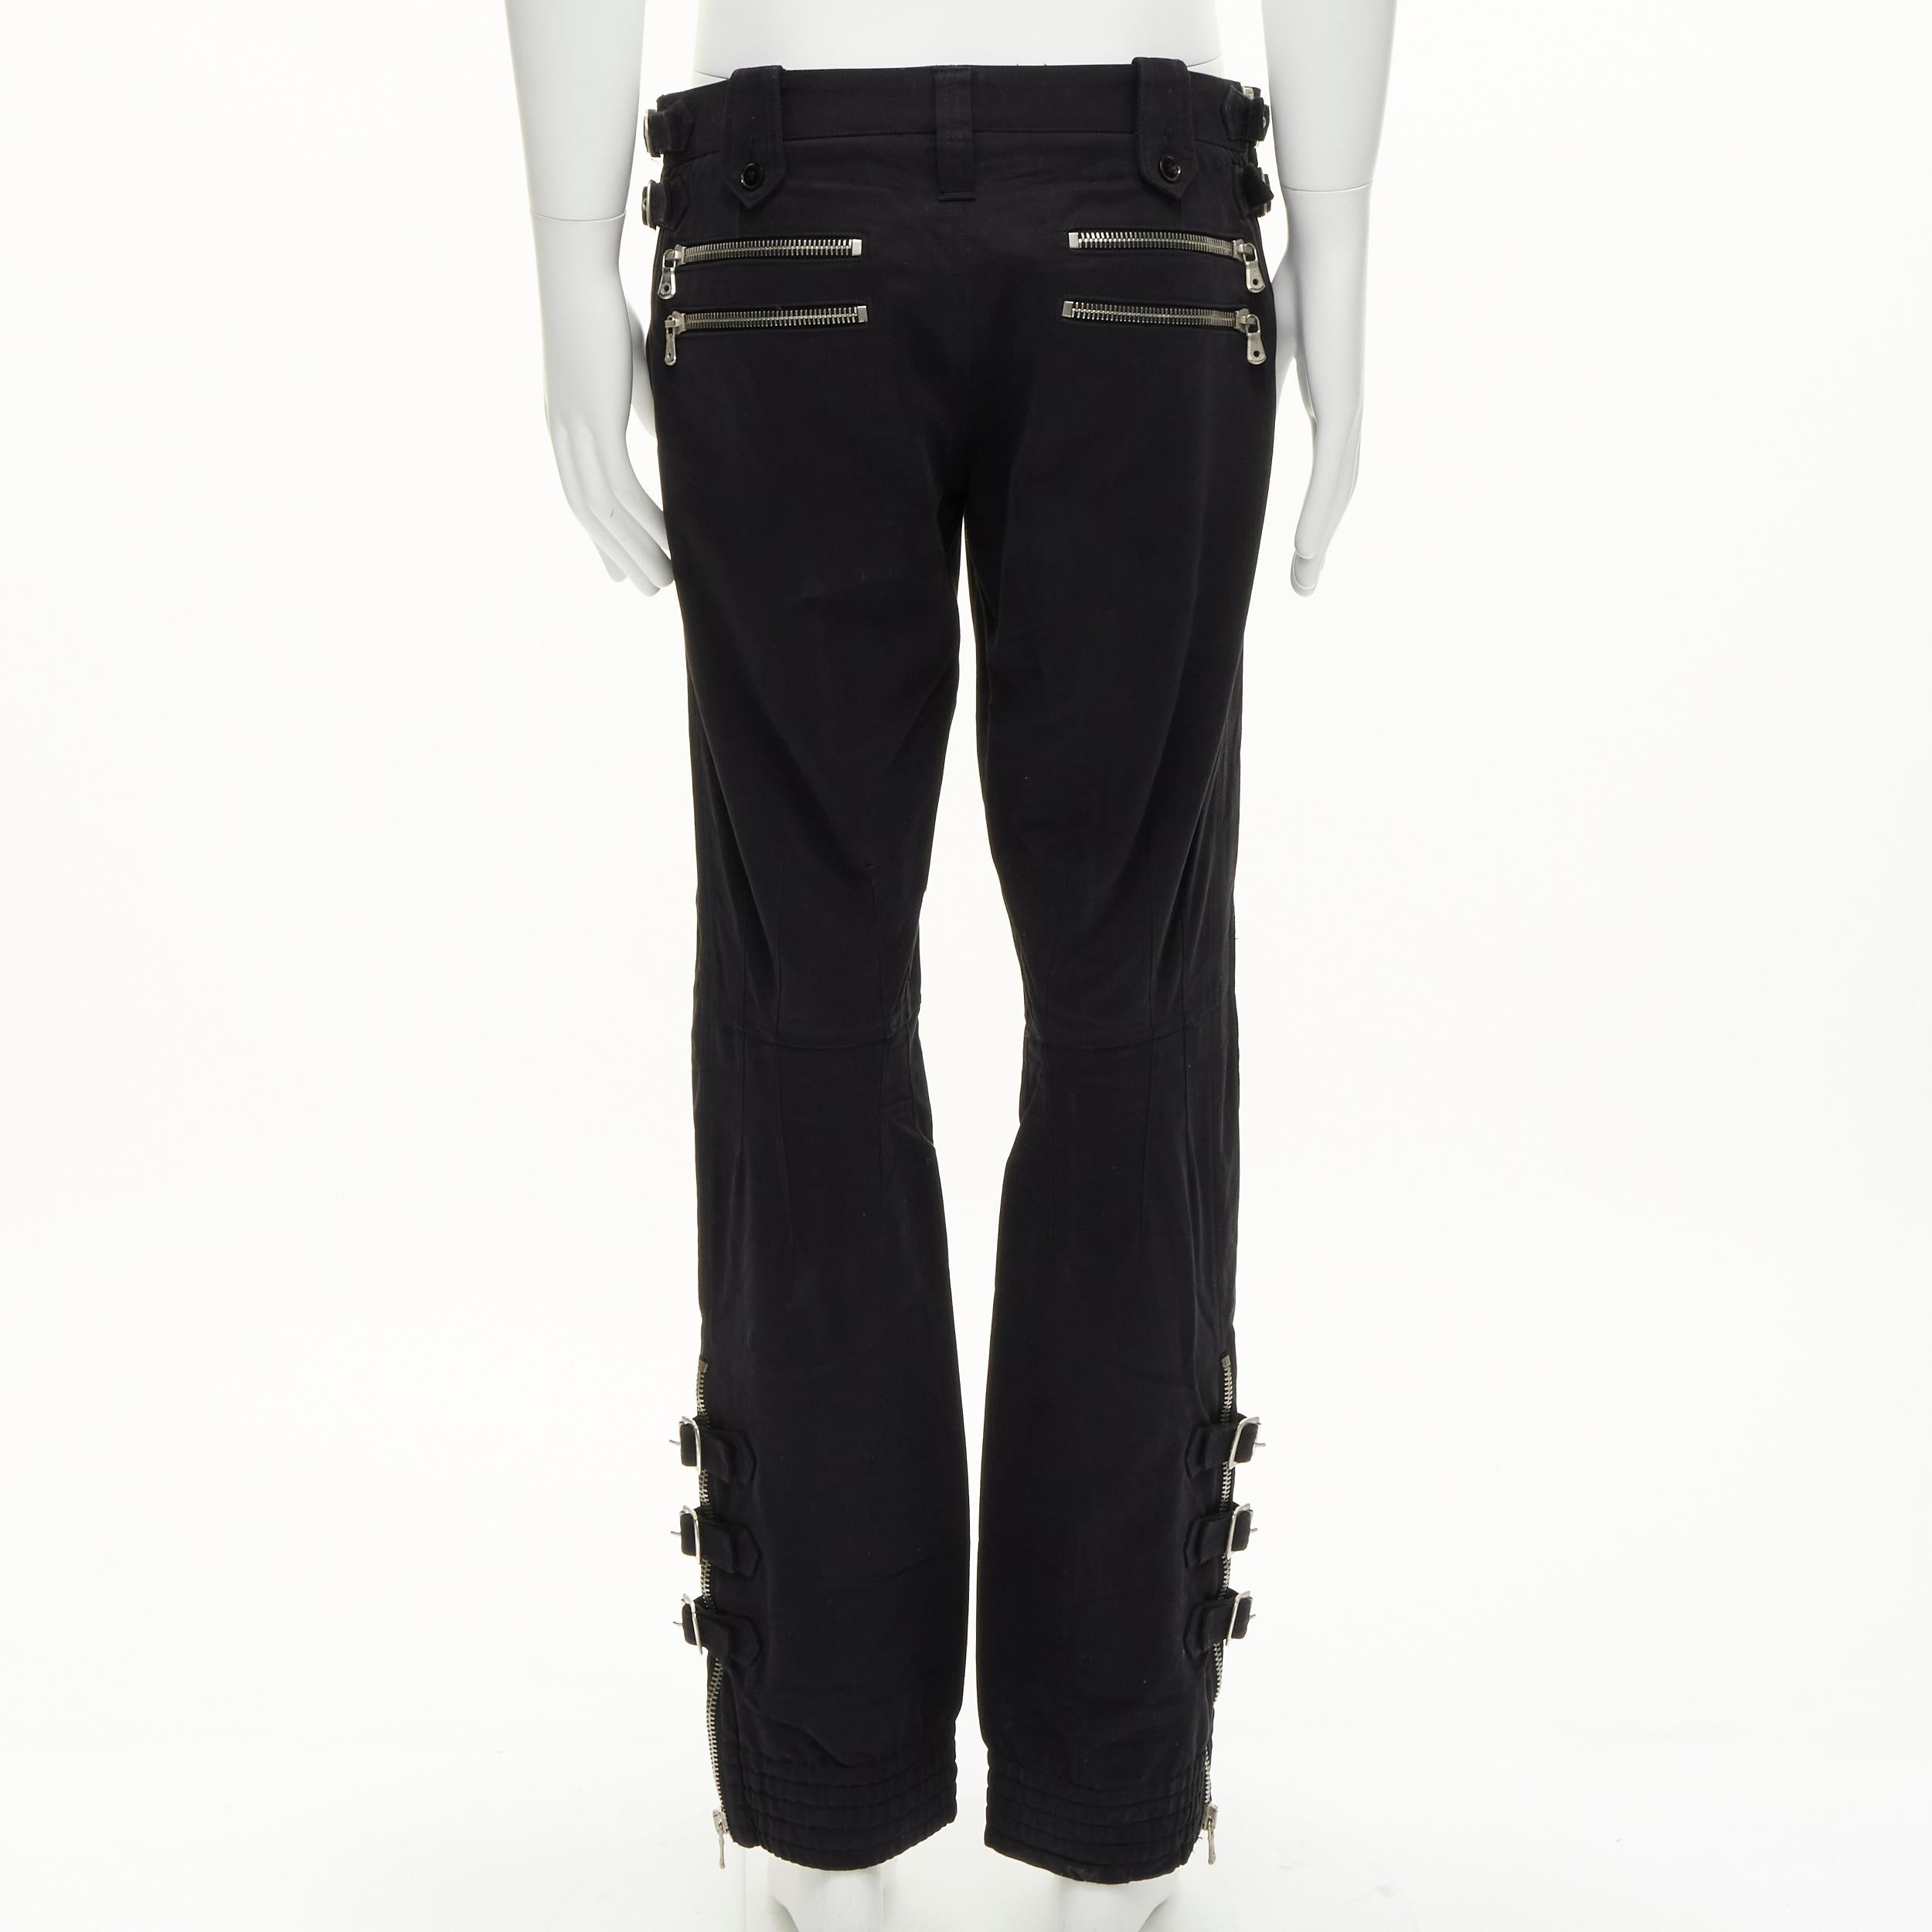 rare DOLCE GABBANA black bondage strap silver buckles boot cut flared pants IT48 M
Reference: TGAS/D00042
Brand: Dolce Gabbana
Designer: Domenico Dolce and Stefano Gabbana
Material: Cotton
Color: Black
Pattern: Solid
Closure: Zip Fly
Extra Details: